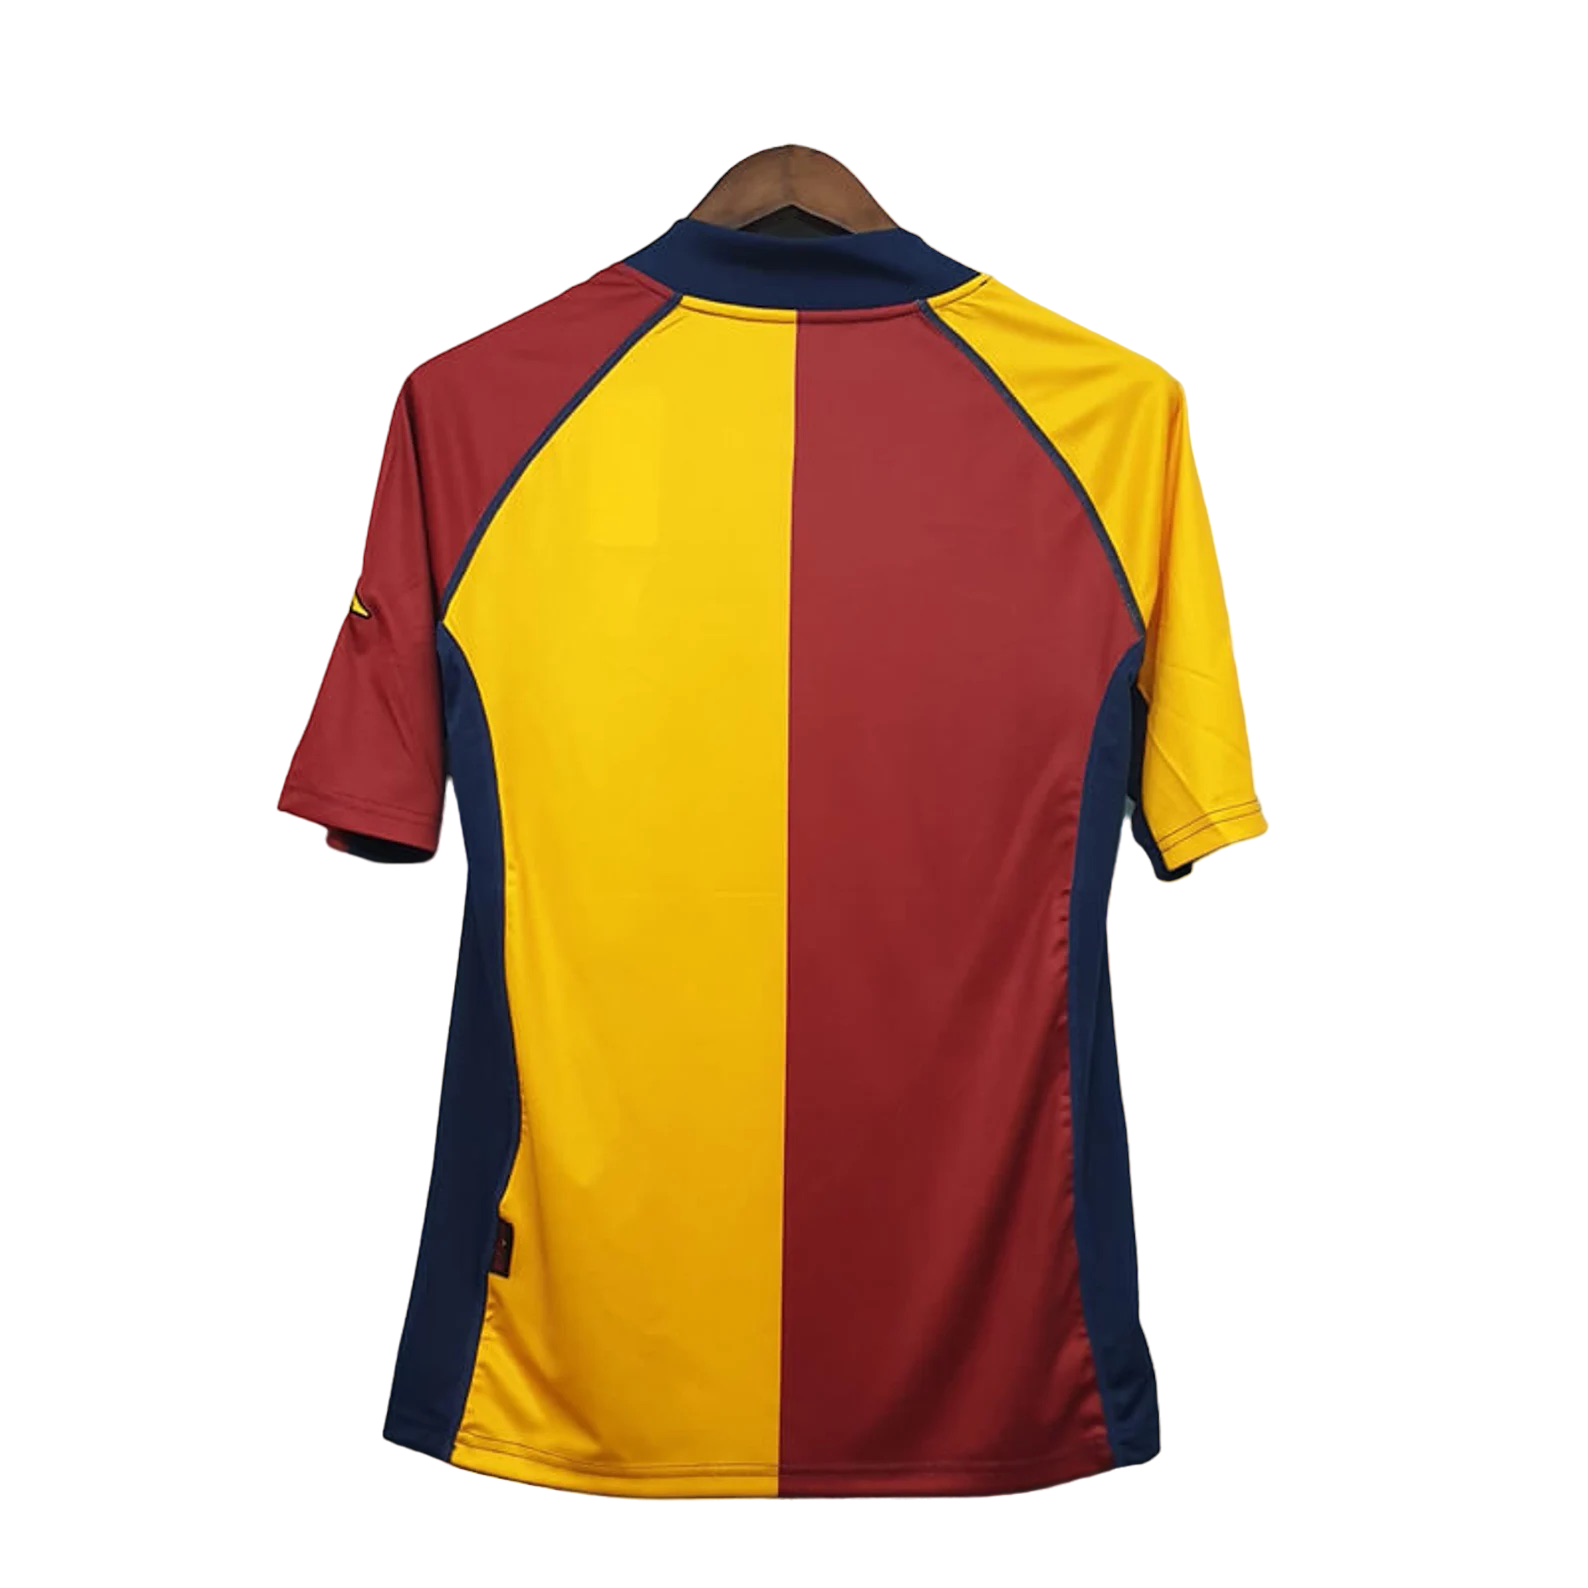 2001/02 A.S. Roma Home Jersey